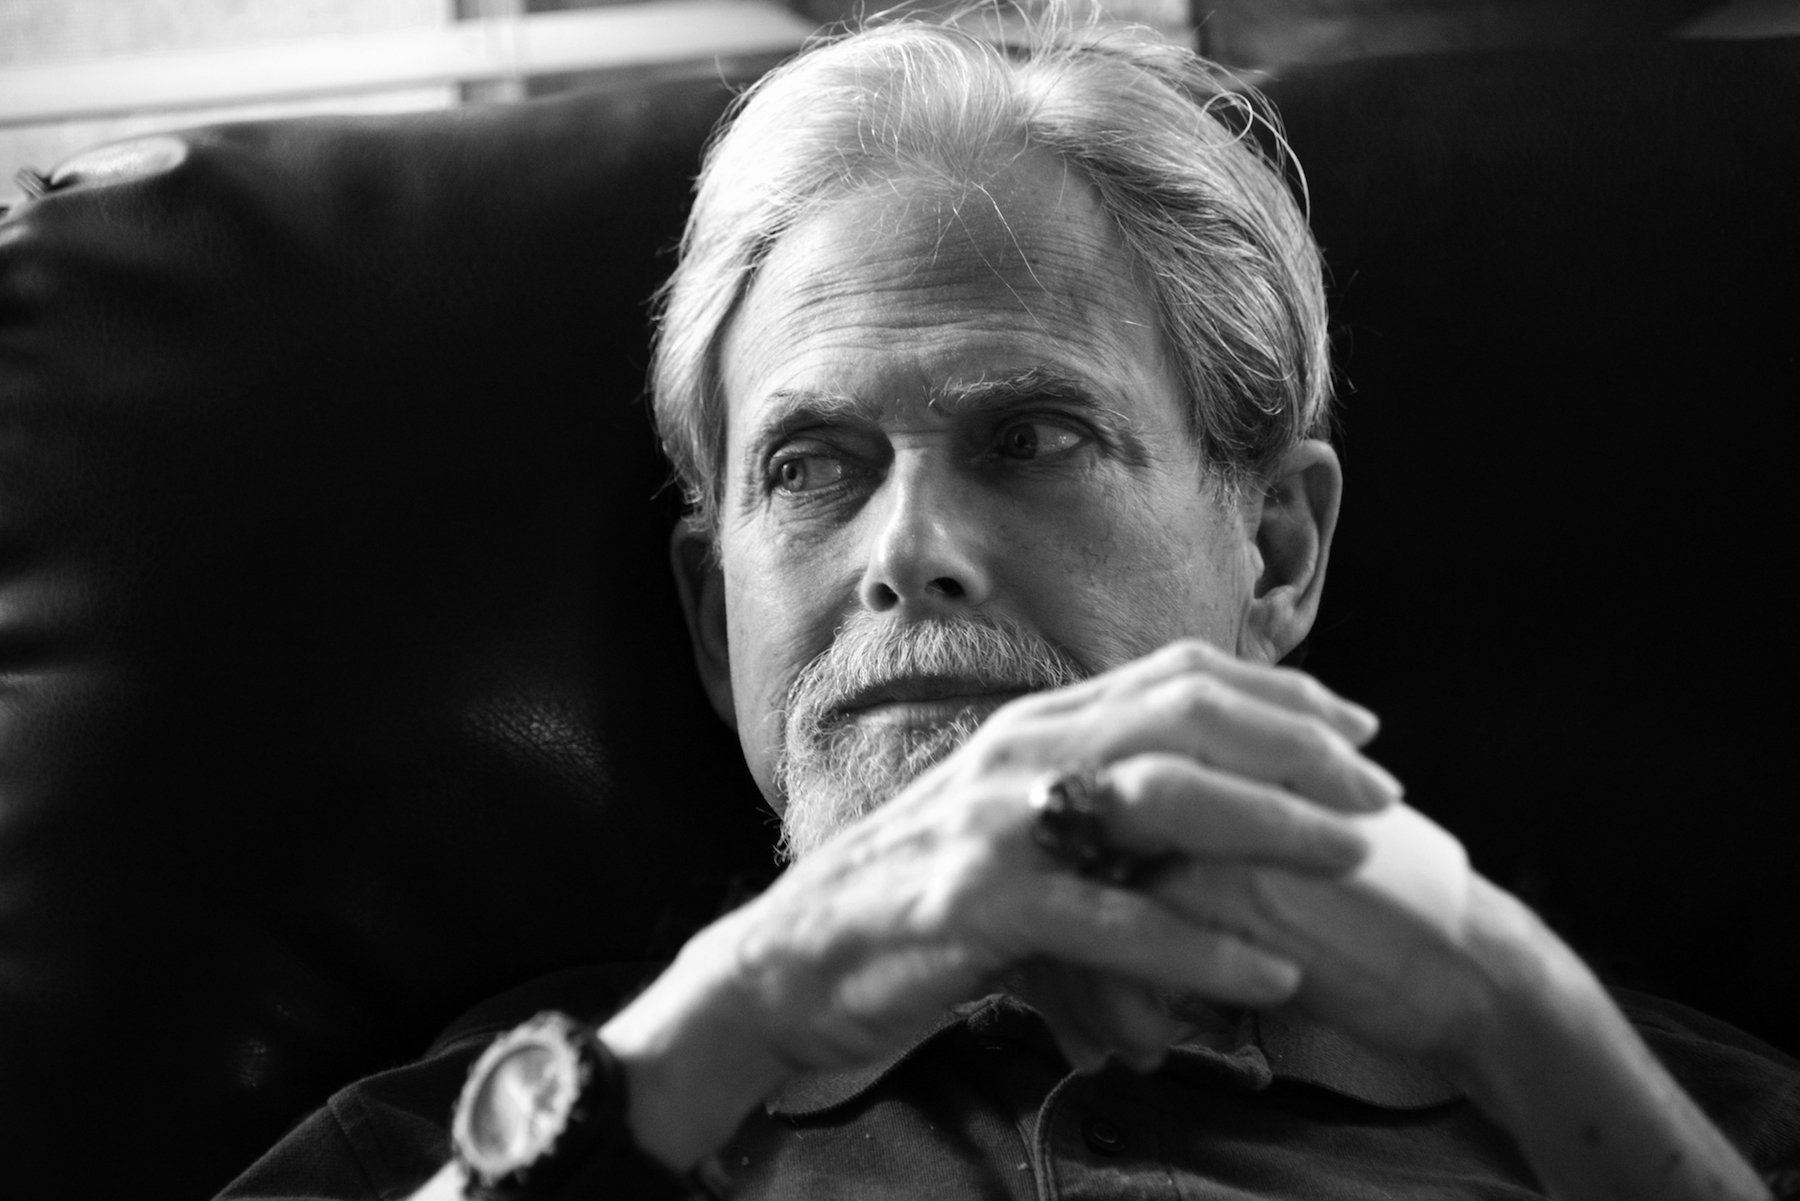 Black and white portrait of Michael Fronk seated in a recliner chair in his home.